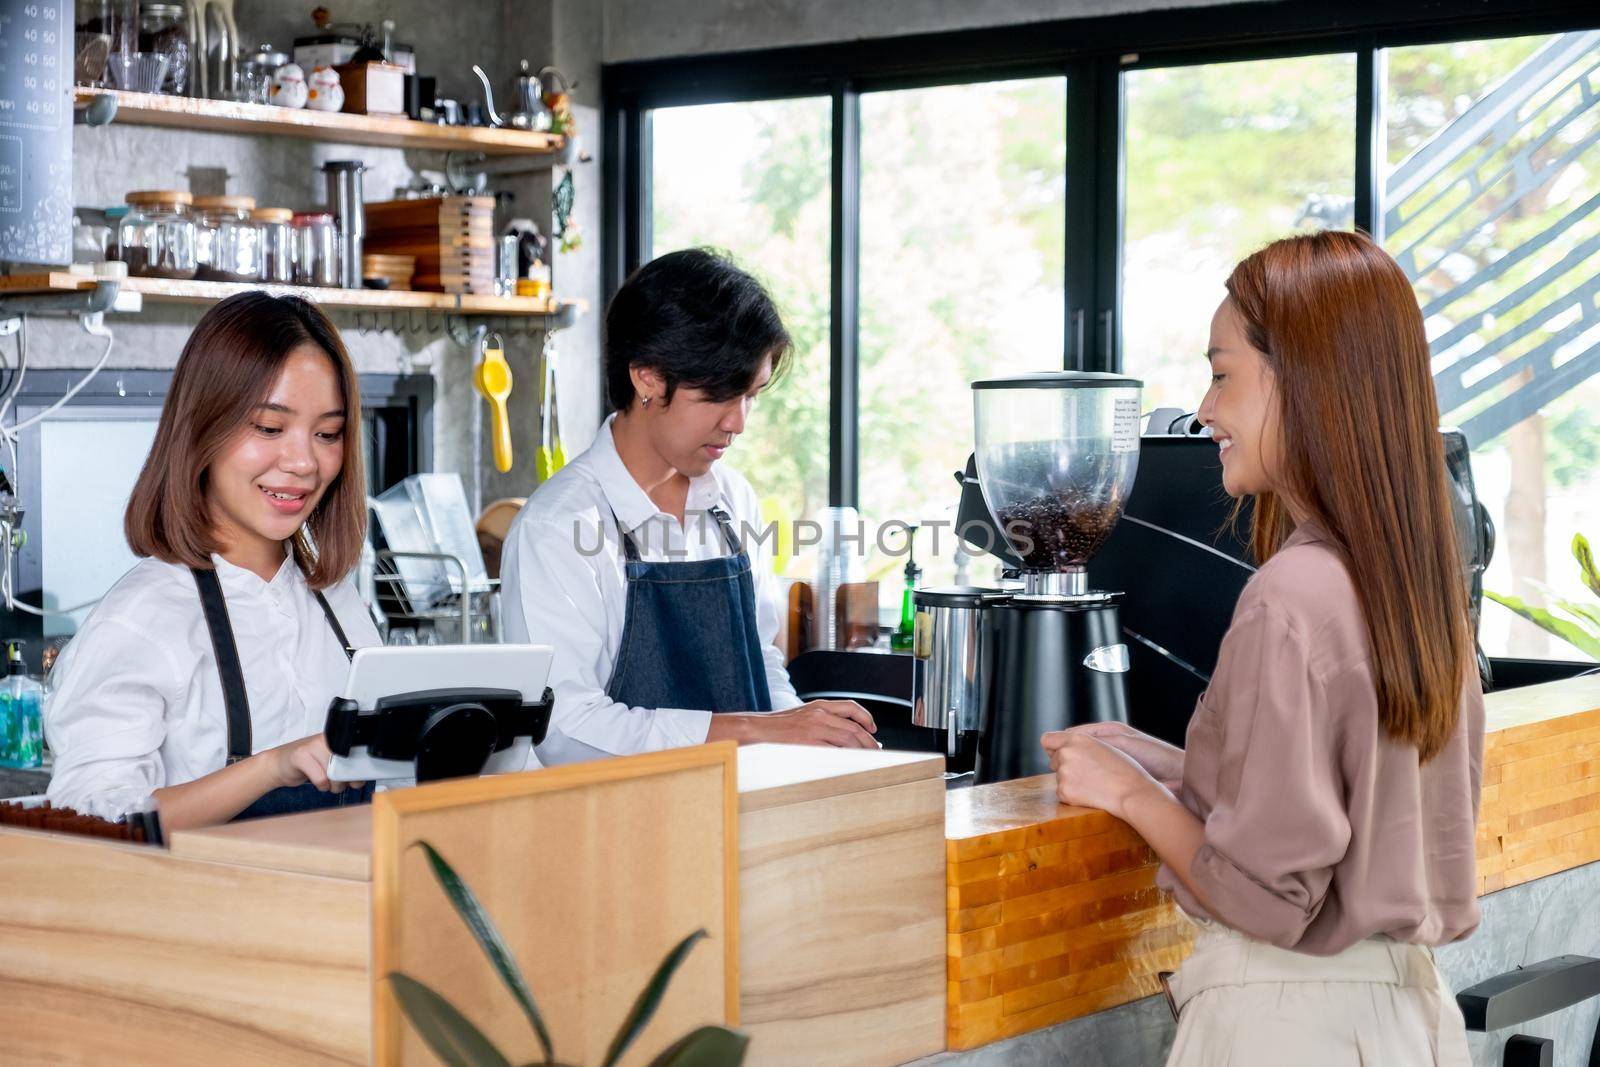 Asian barista or coffee maker receive the order from customer woman while her co-worker prepare coffee by machine. Concept of good teamwork support small business system.